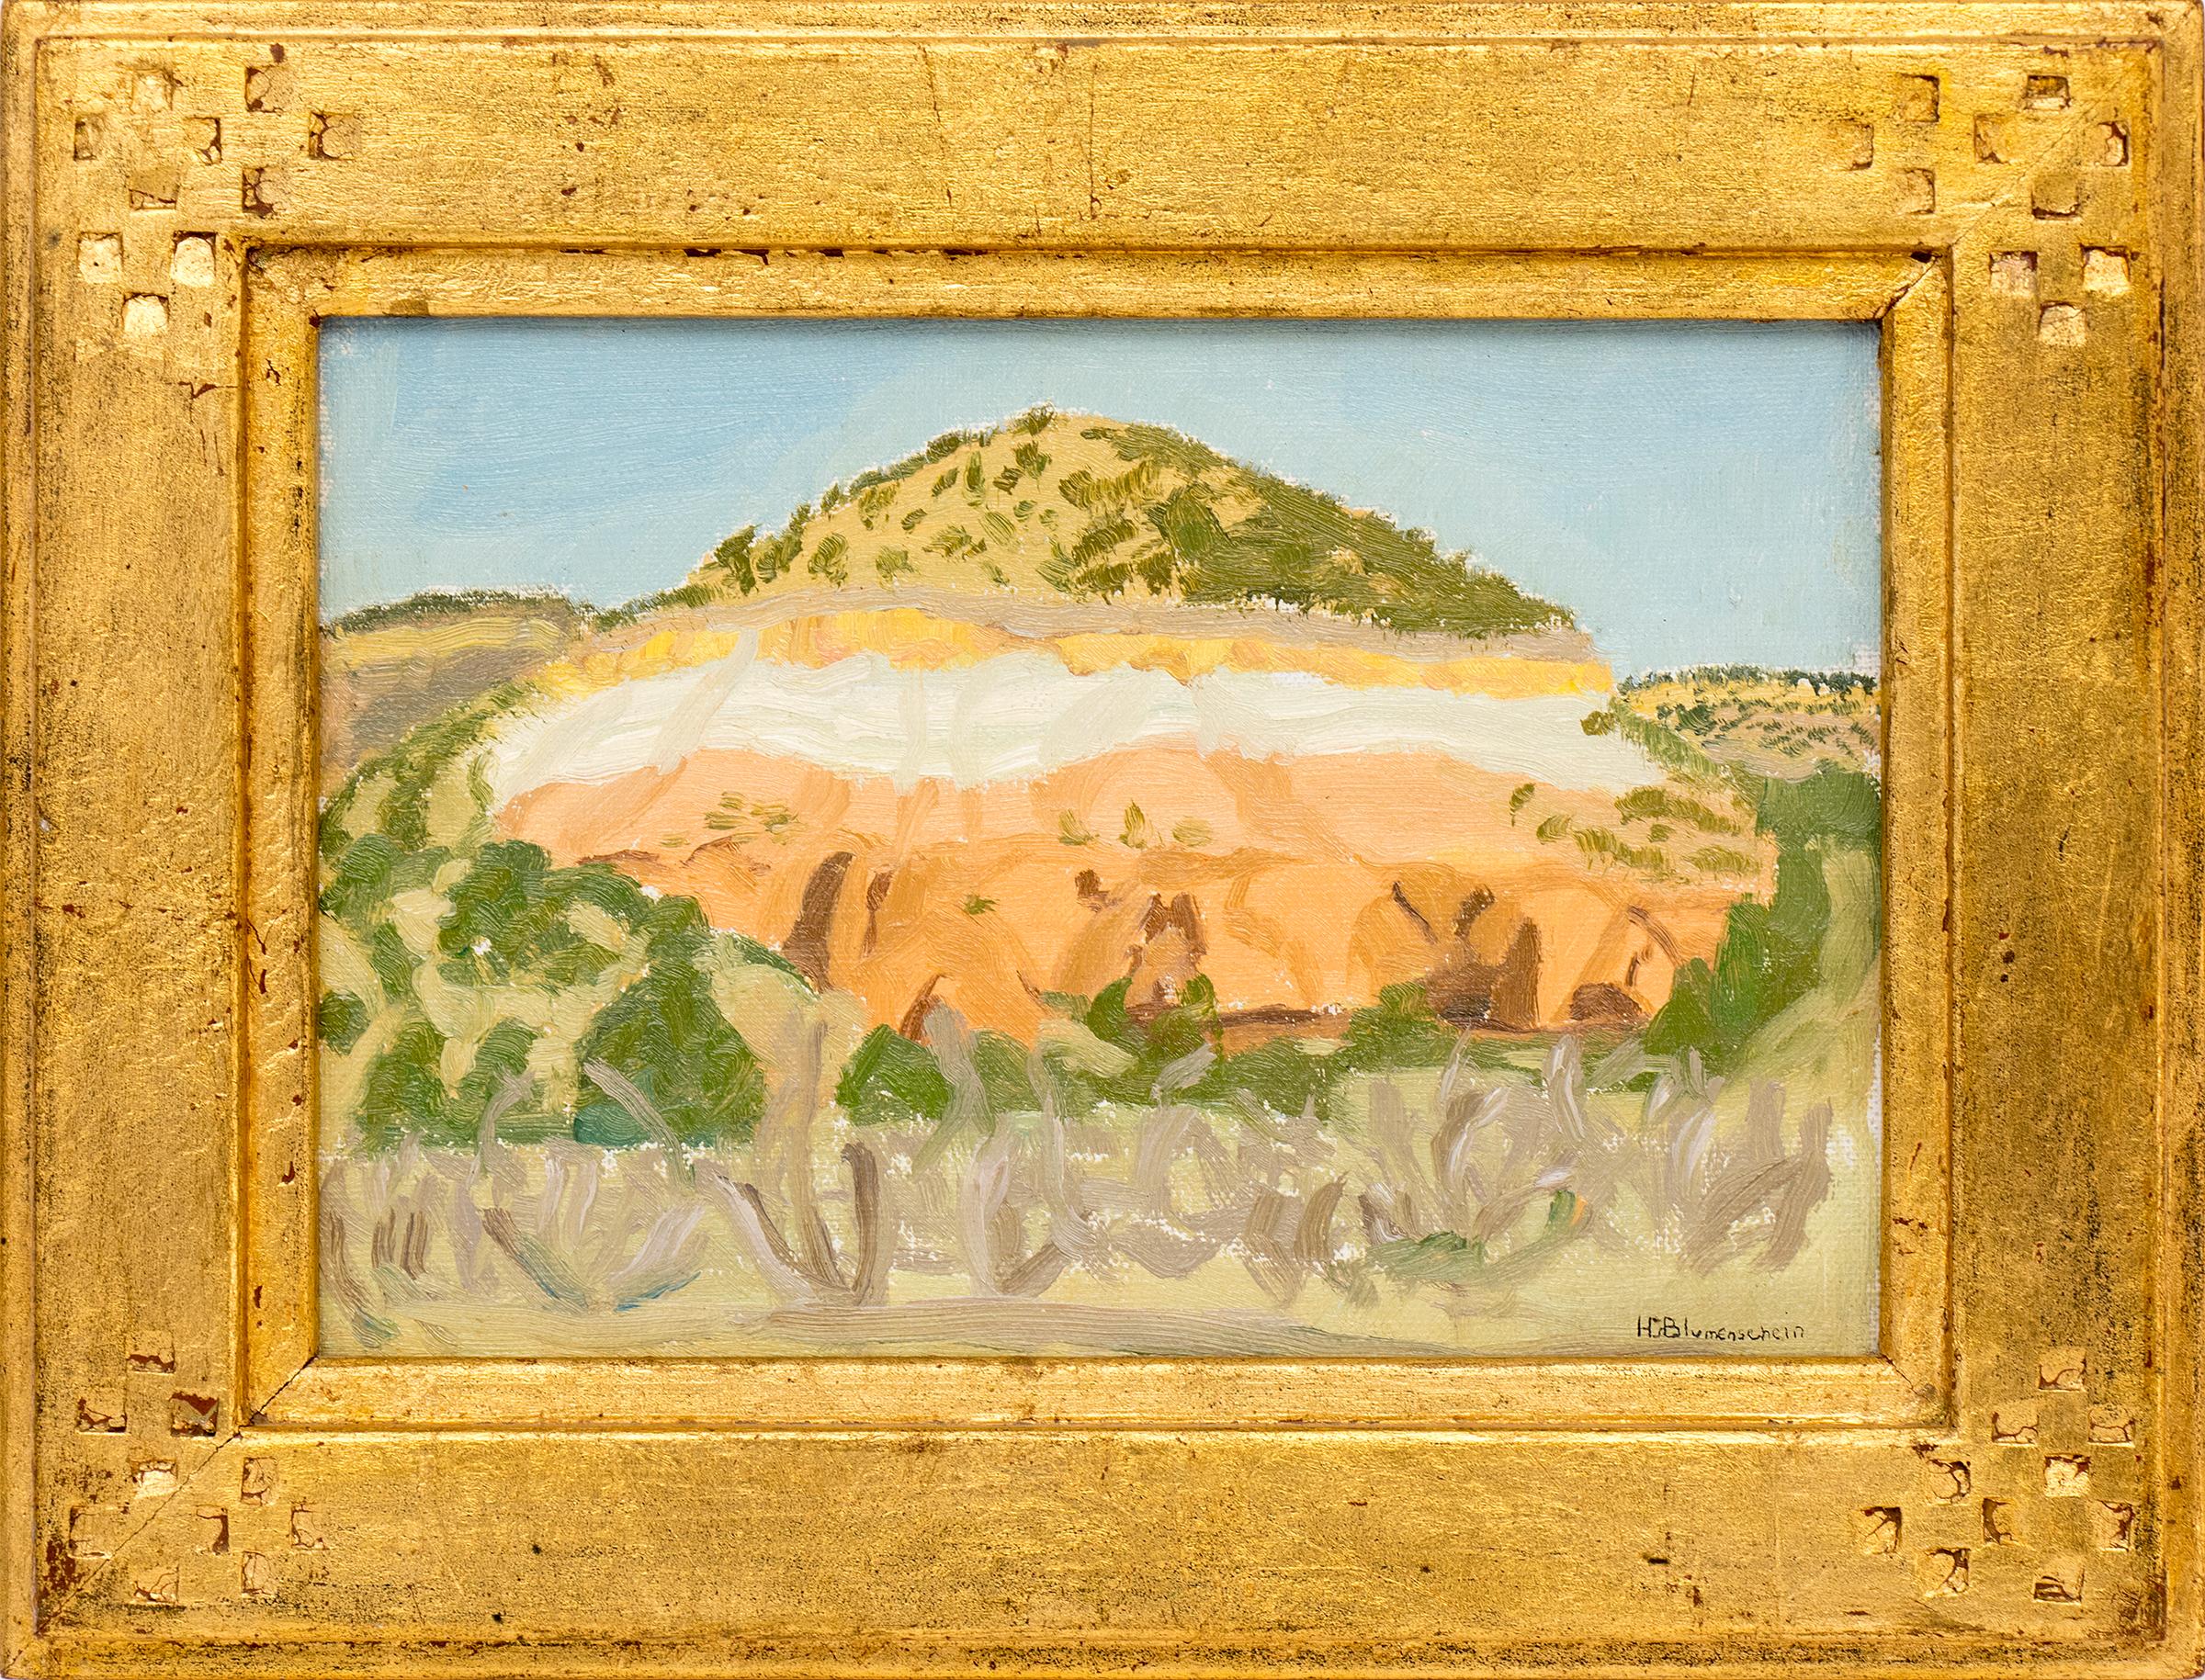 Navajo Canyon, Mountain Canyon near Taos, New Mexico, 1920s Southwest Landscape - Painting by Helen Blumenschein